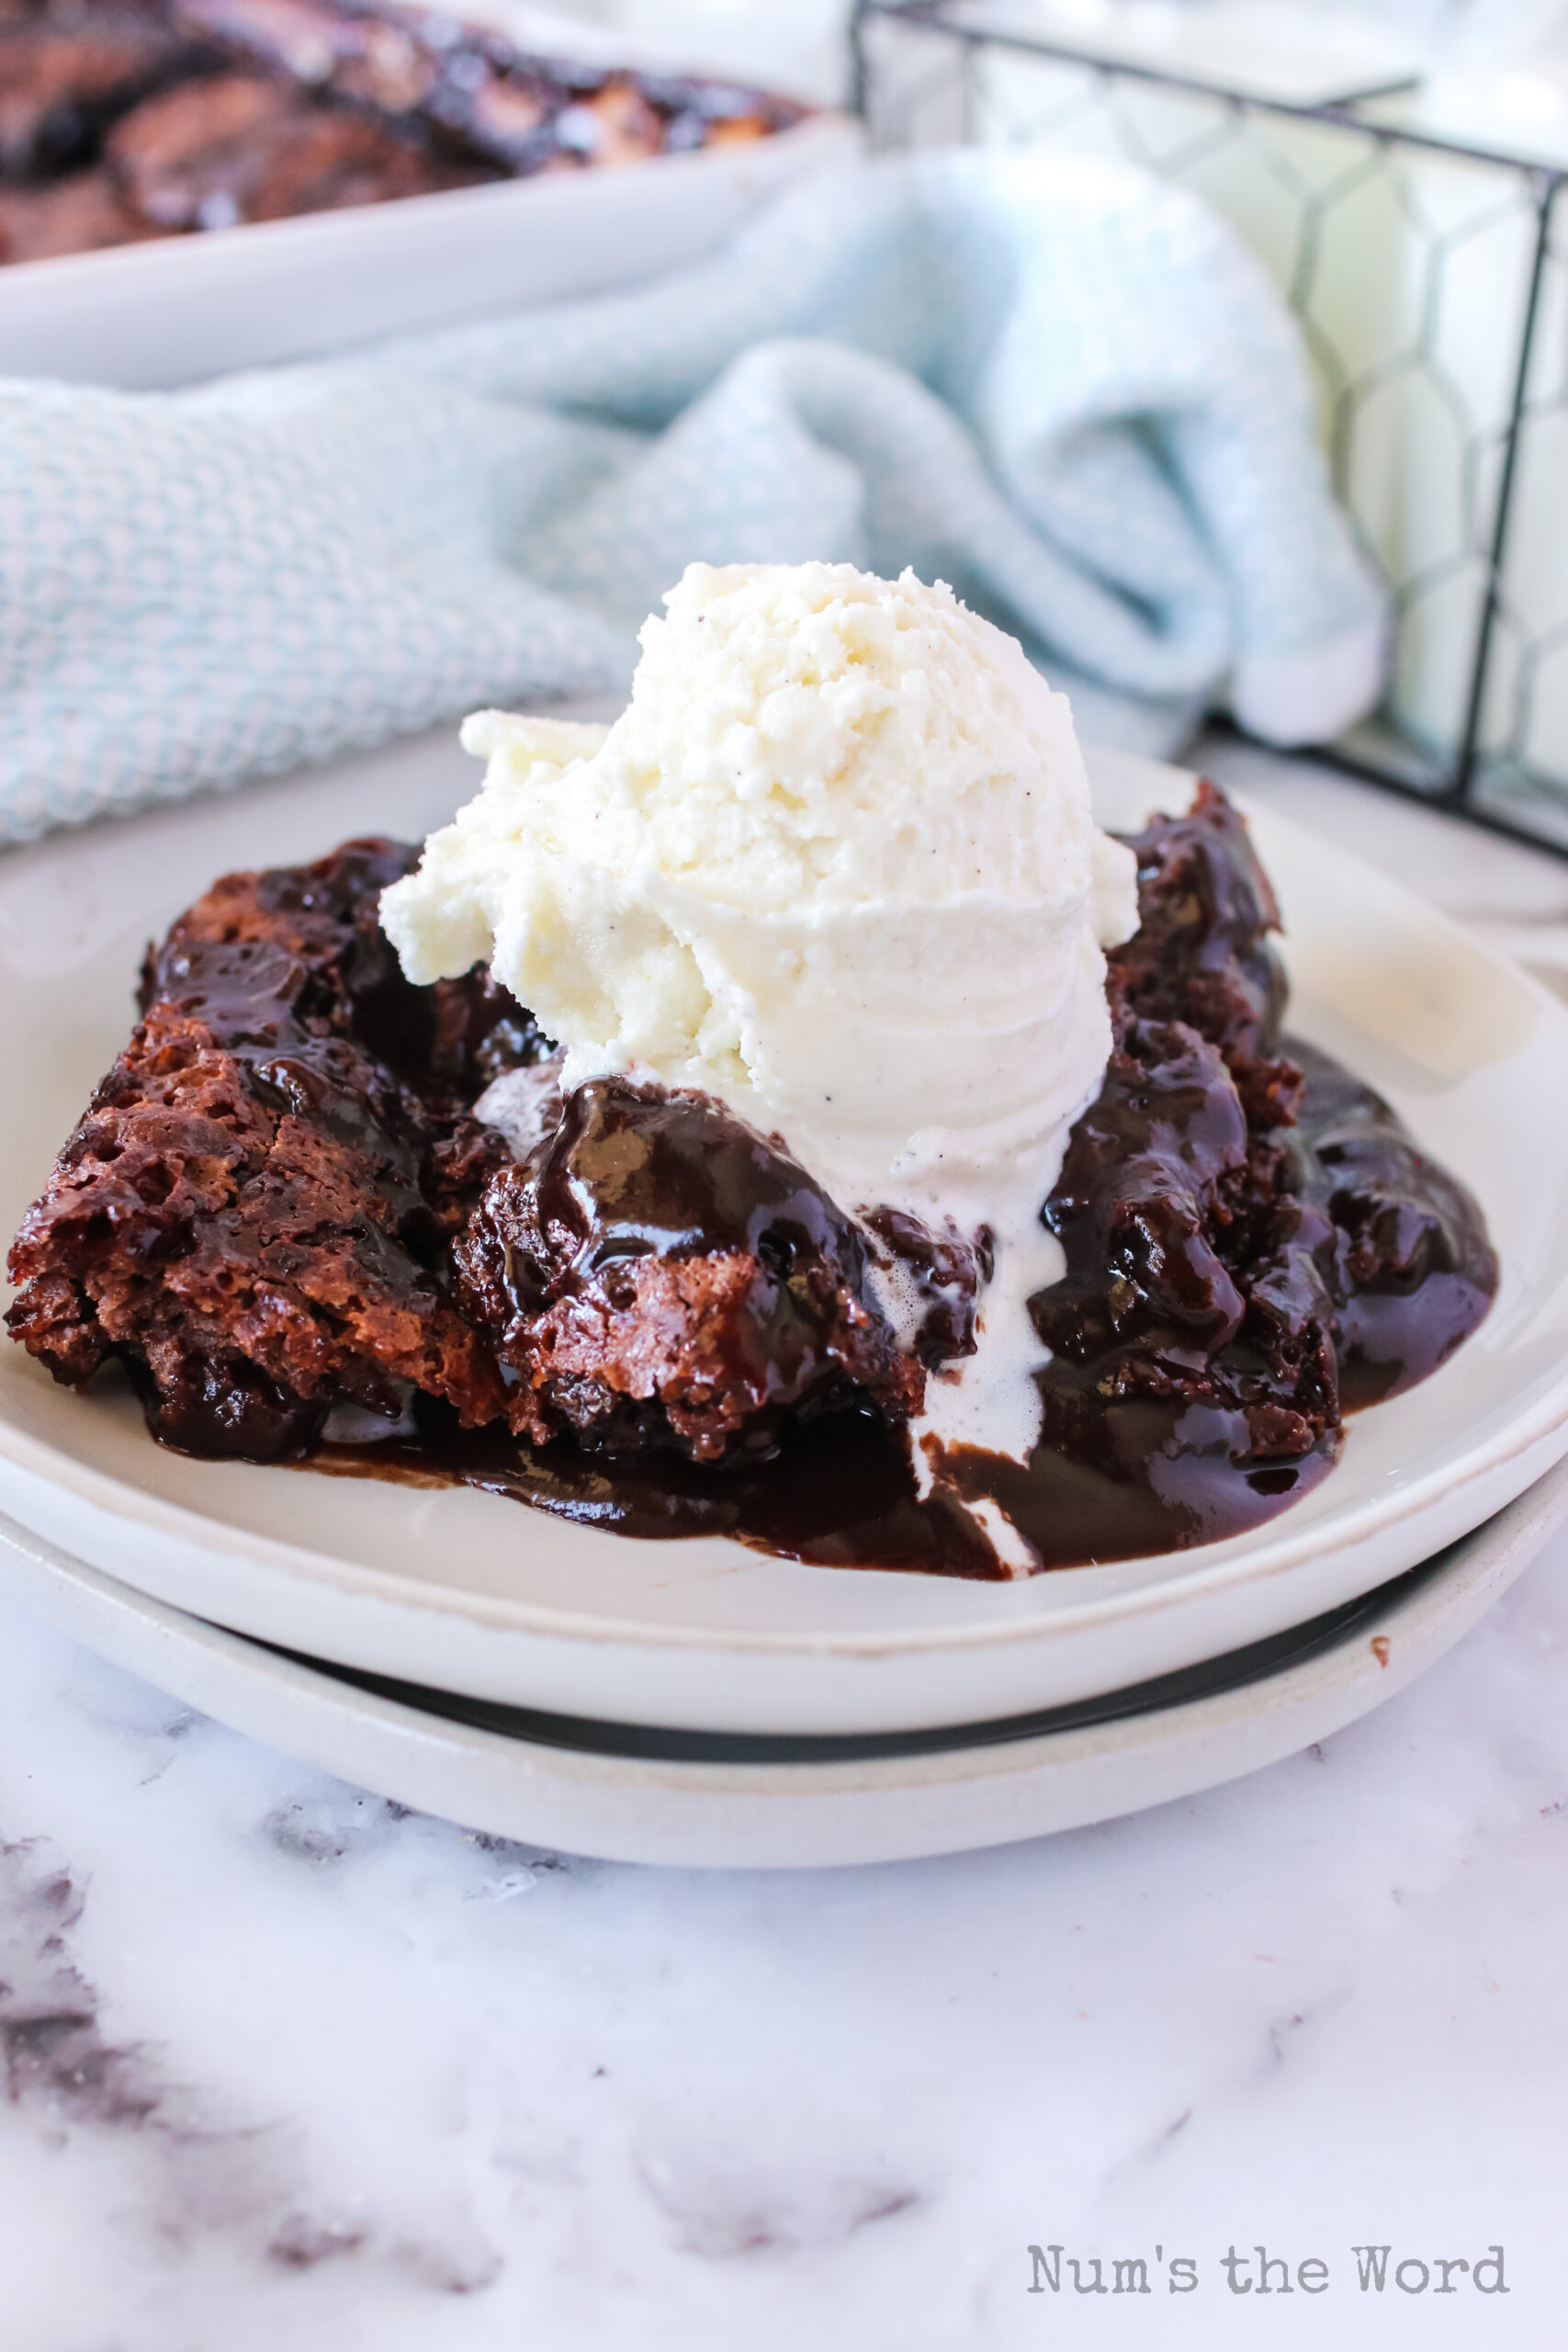 chocolate cobbler fresh out of the oven with a scoop of vanilla ice cream on top